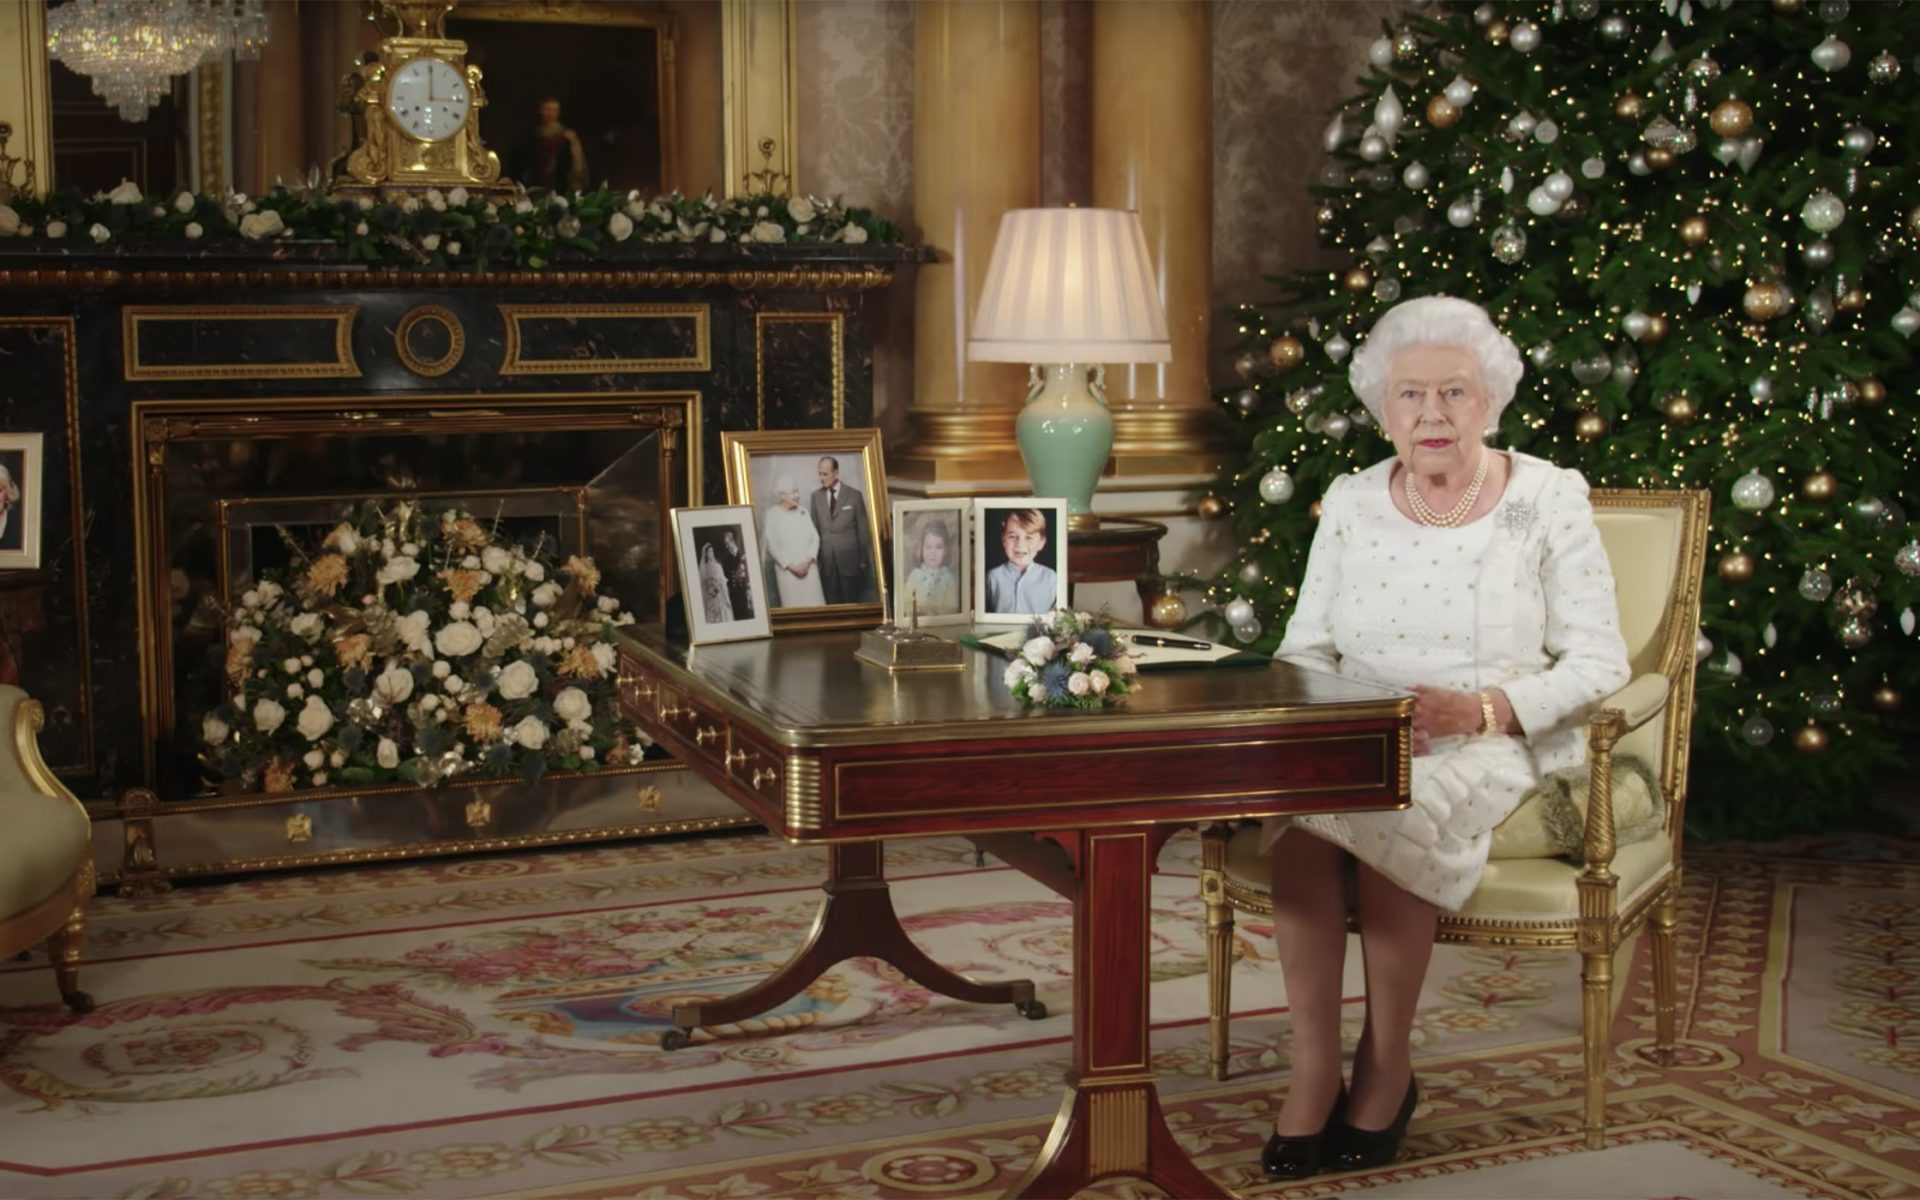 See How the Royal Family Decorates for Christmas at Buckingham Palace - Galerie